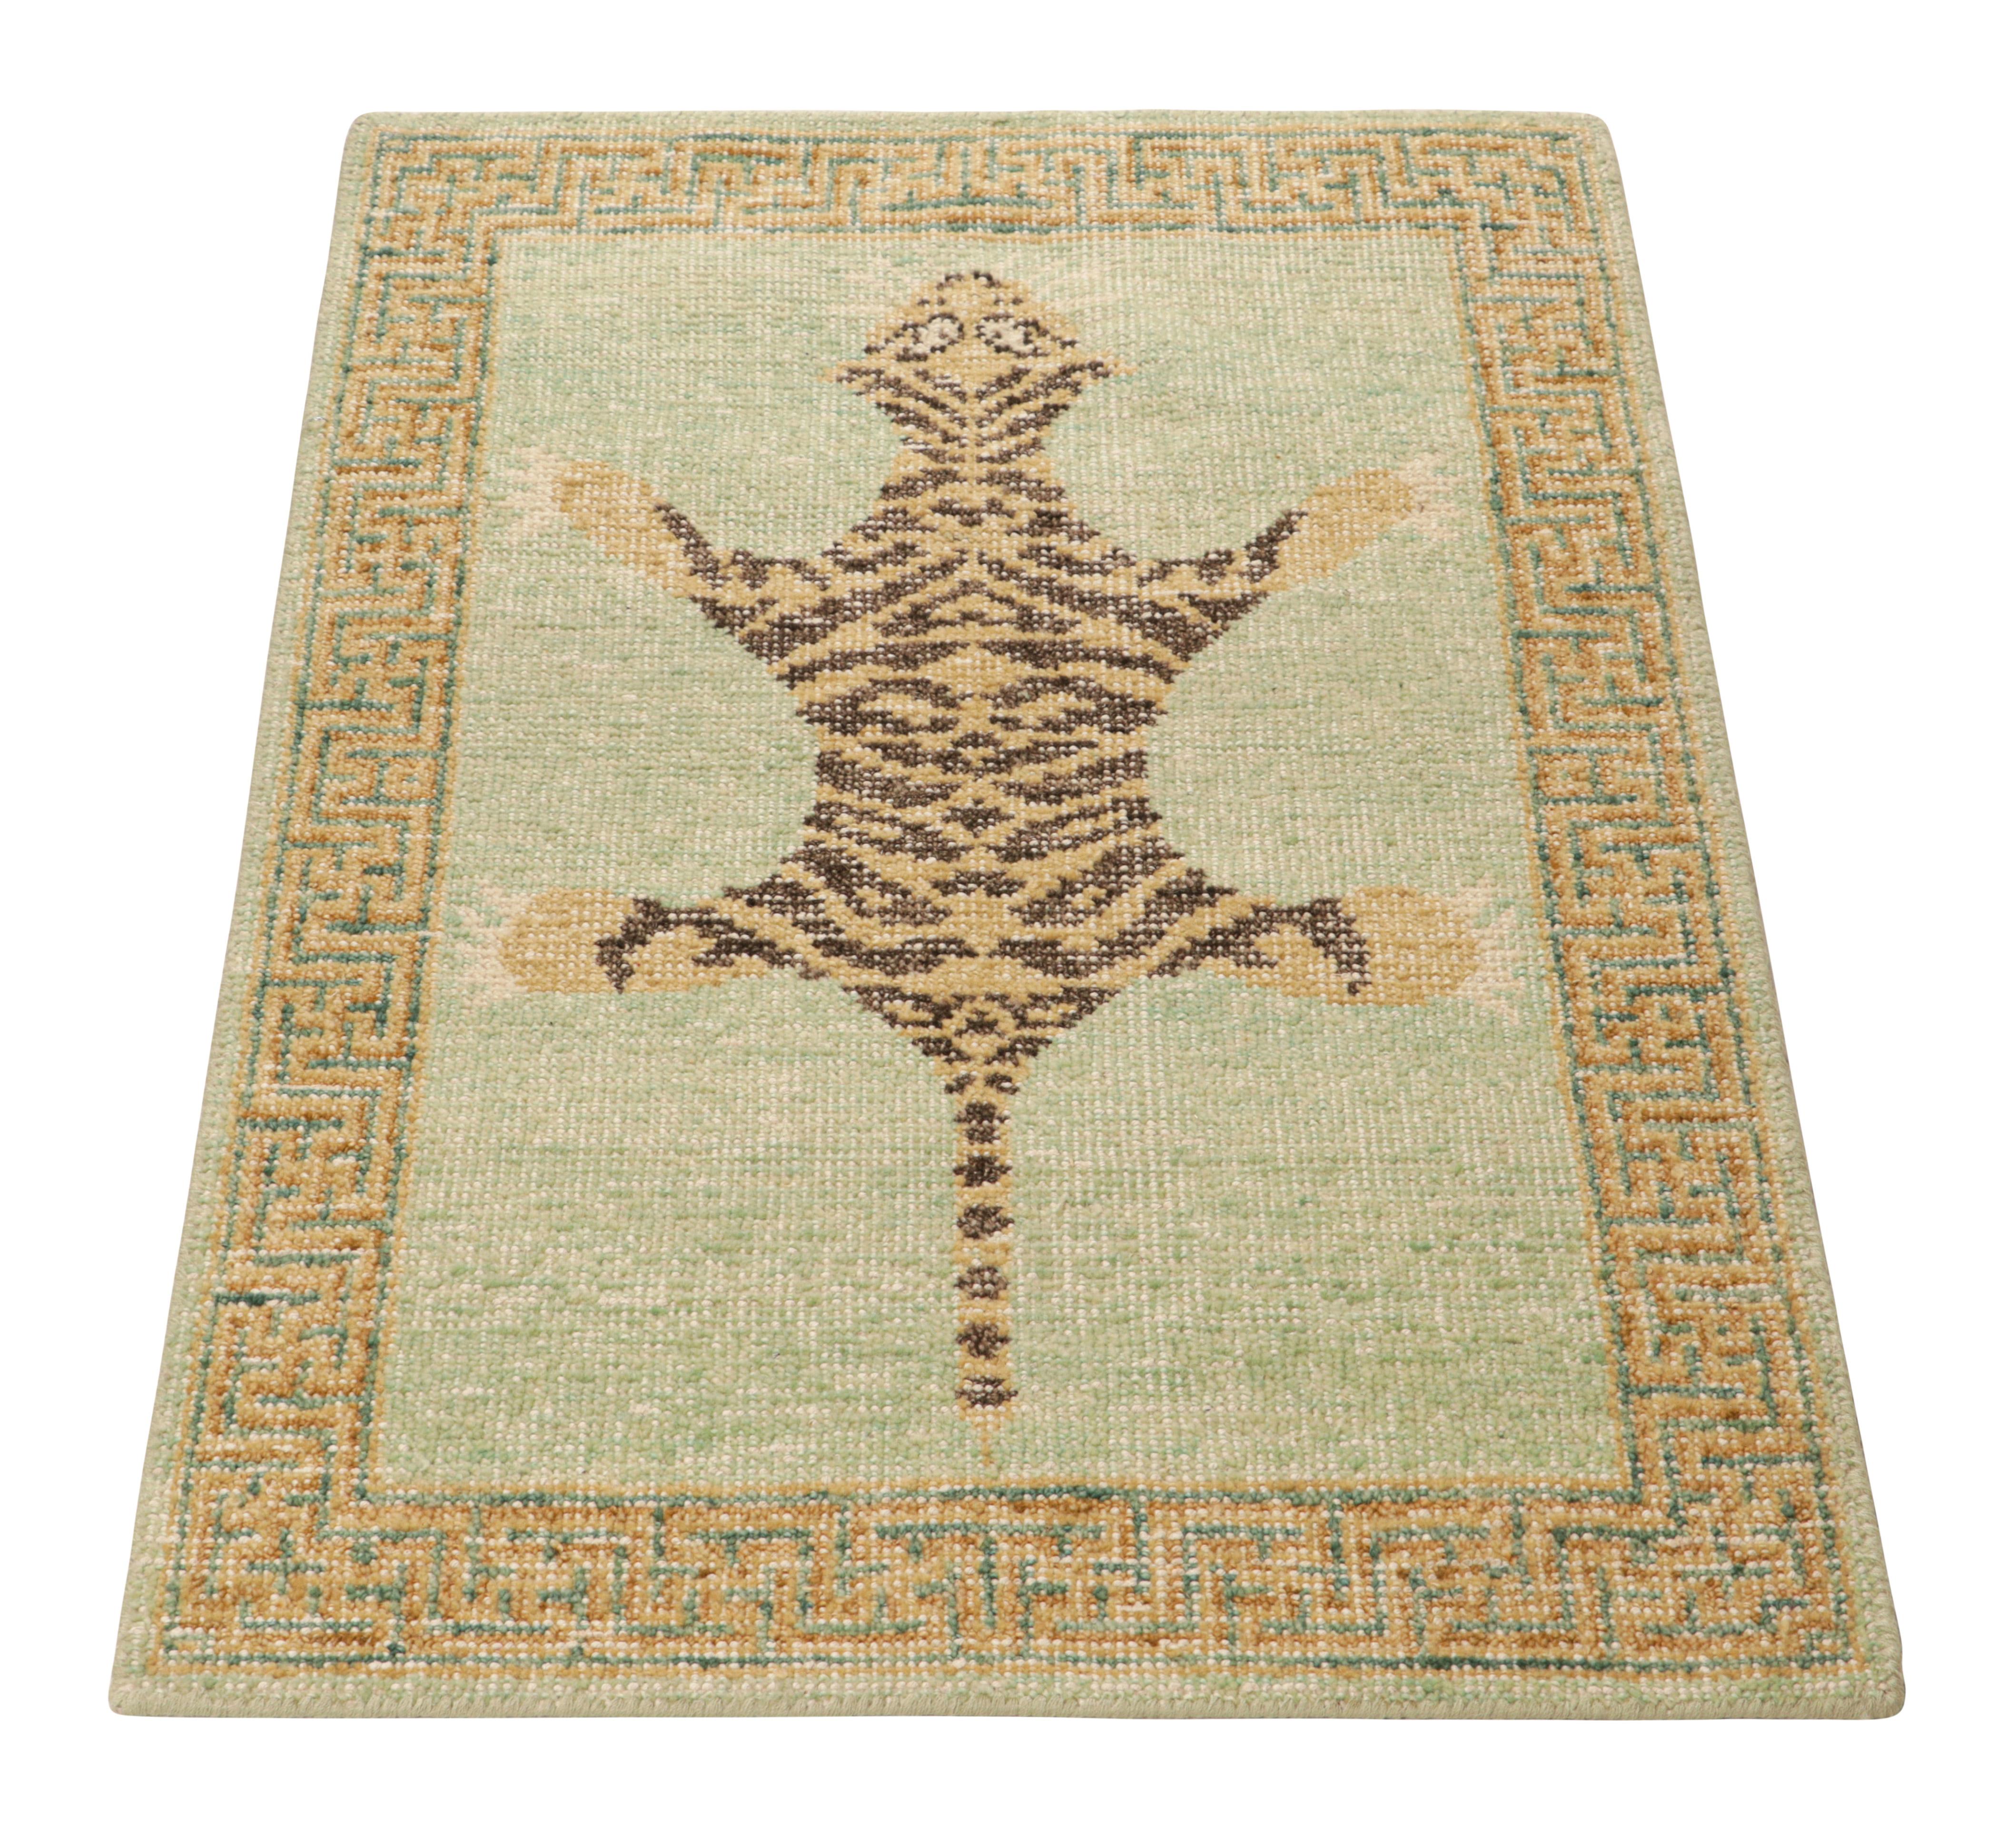 Rug & Kilim’s Modern Tiger Skin Accent Pictorial Rug in Green, Beige and Black In New Condition For Sale In Long Island City, NY